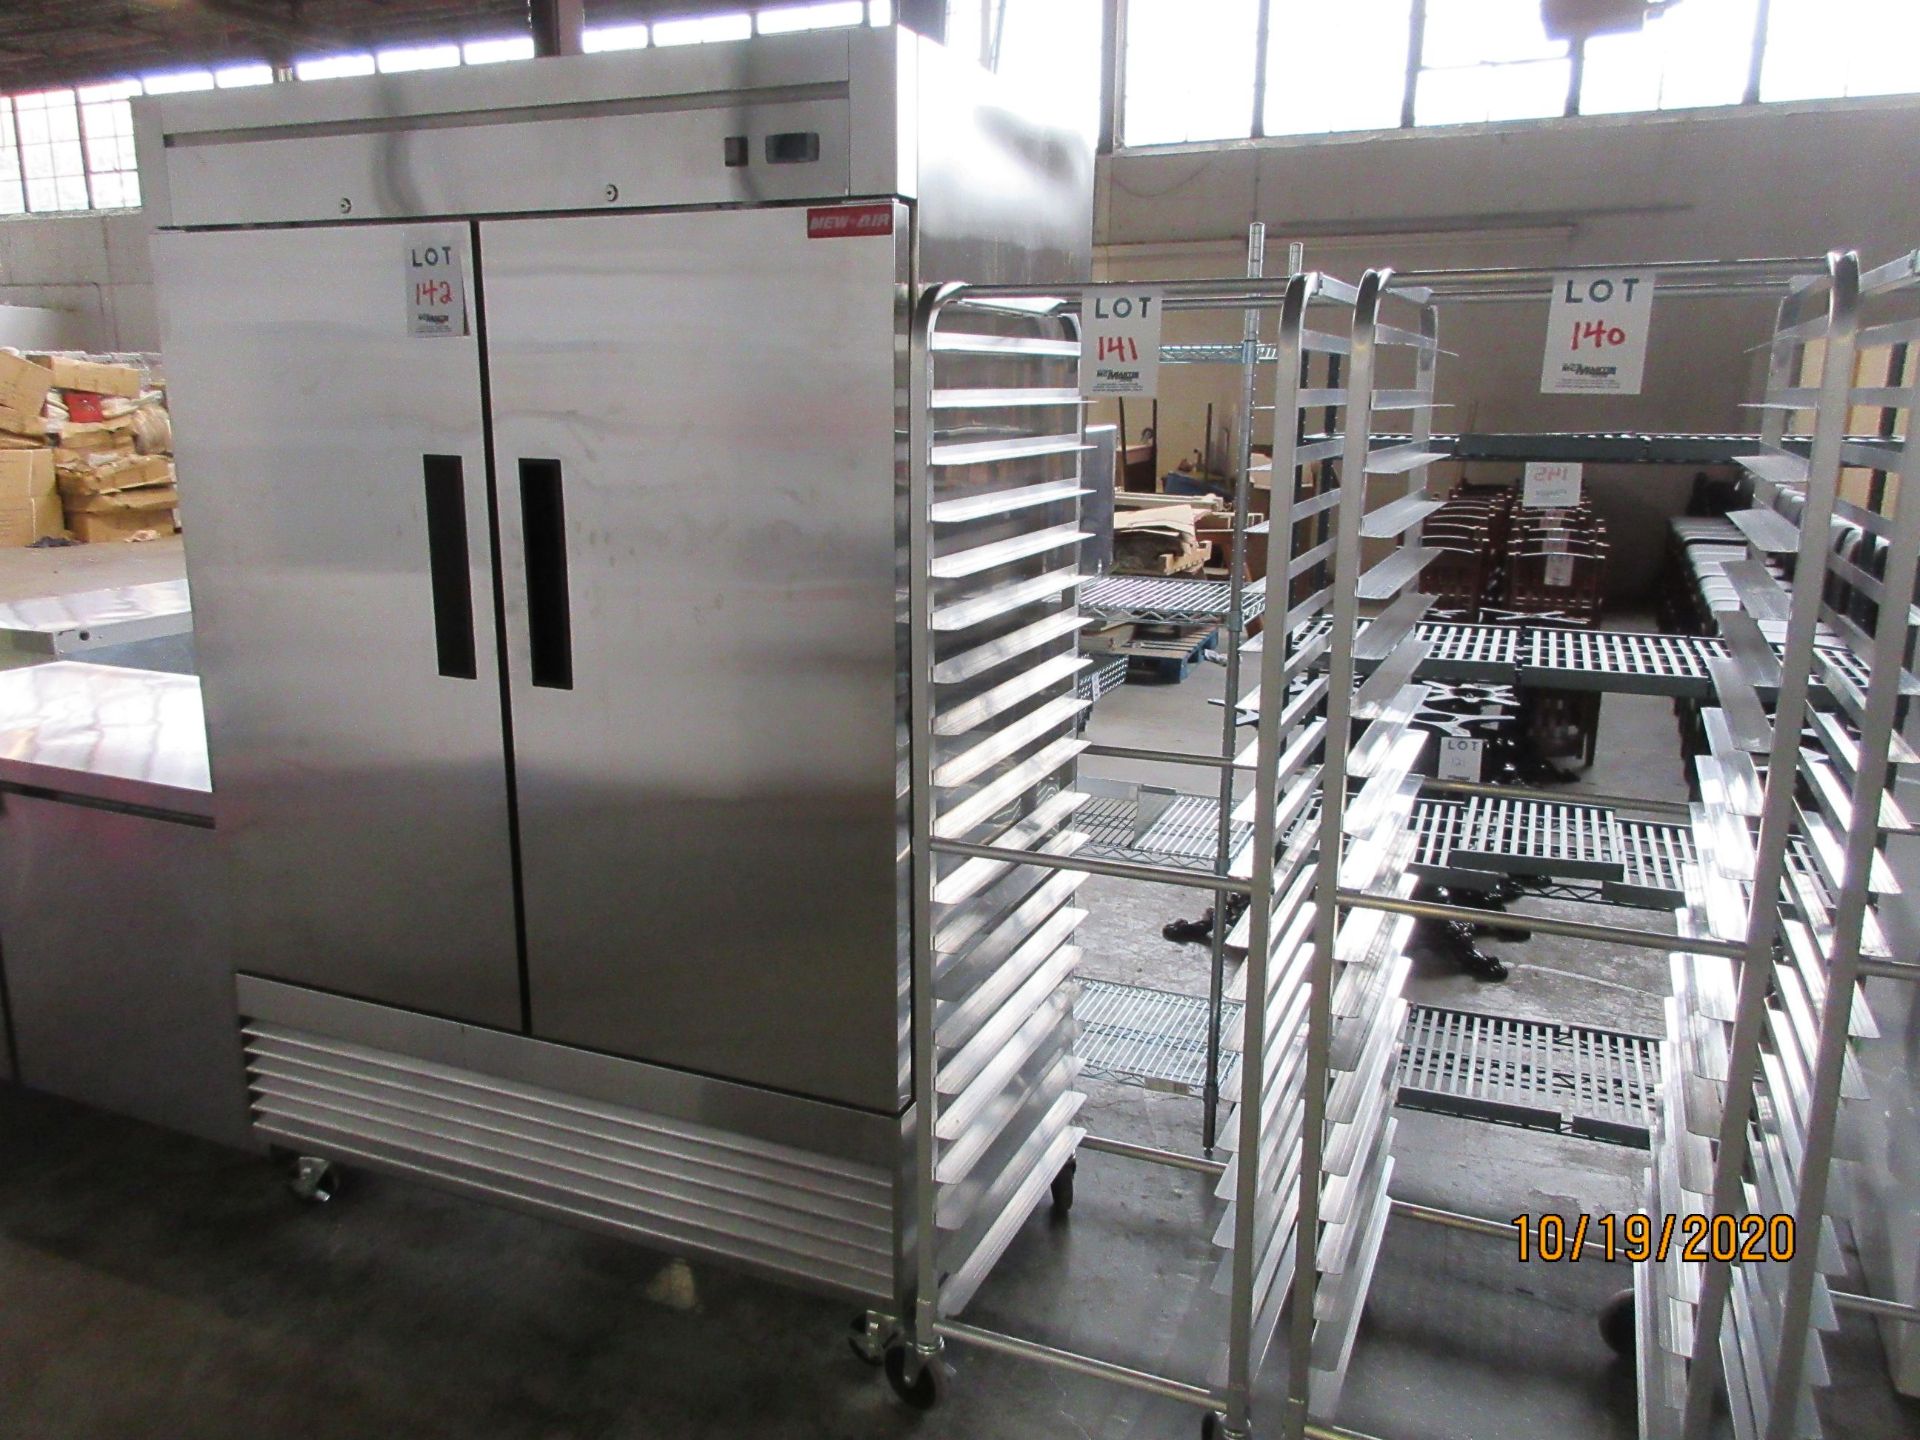 Pastry rack on wheels (approx. 20"w x 26"d x 69"h)